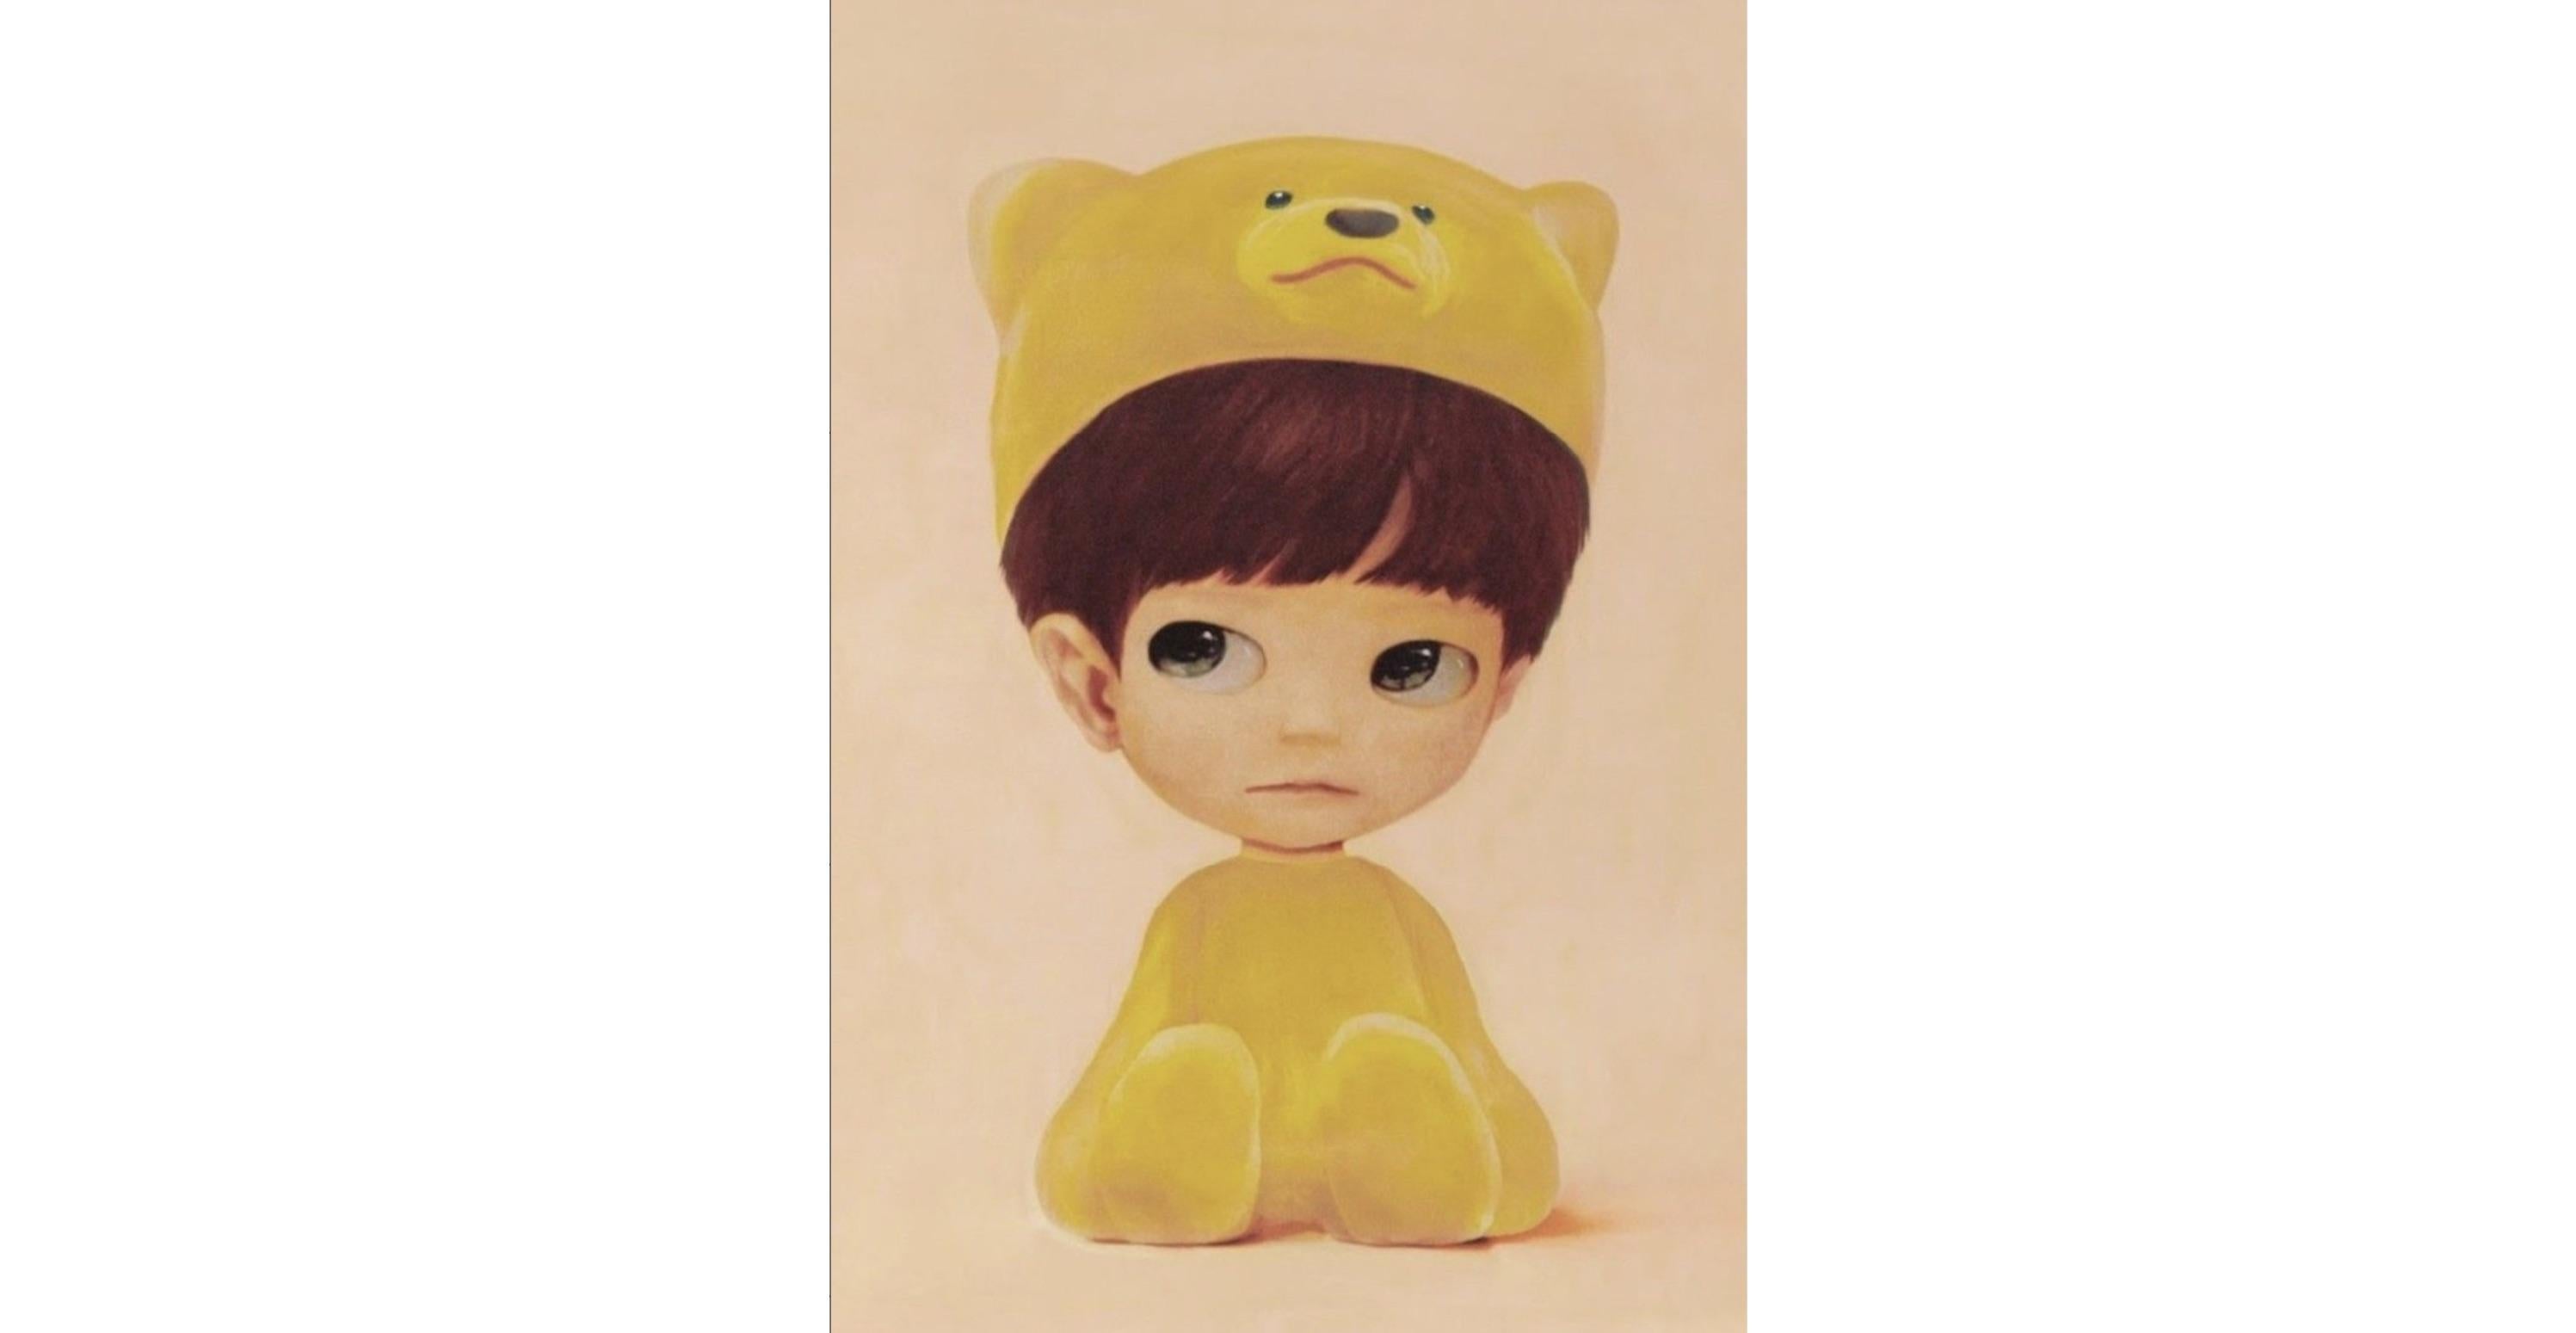 Mayuka Yamamoto
Sitting Bear, 2022
Lithograph in colors
27 3/5 × 21 3/10 in  70 × 54 cm
Edition of 75